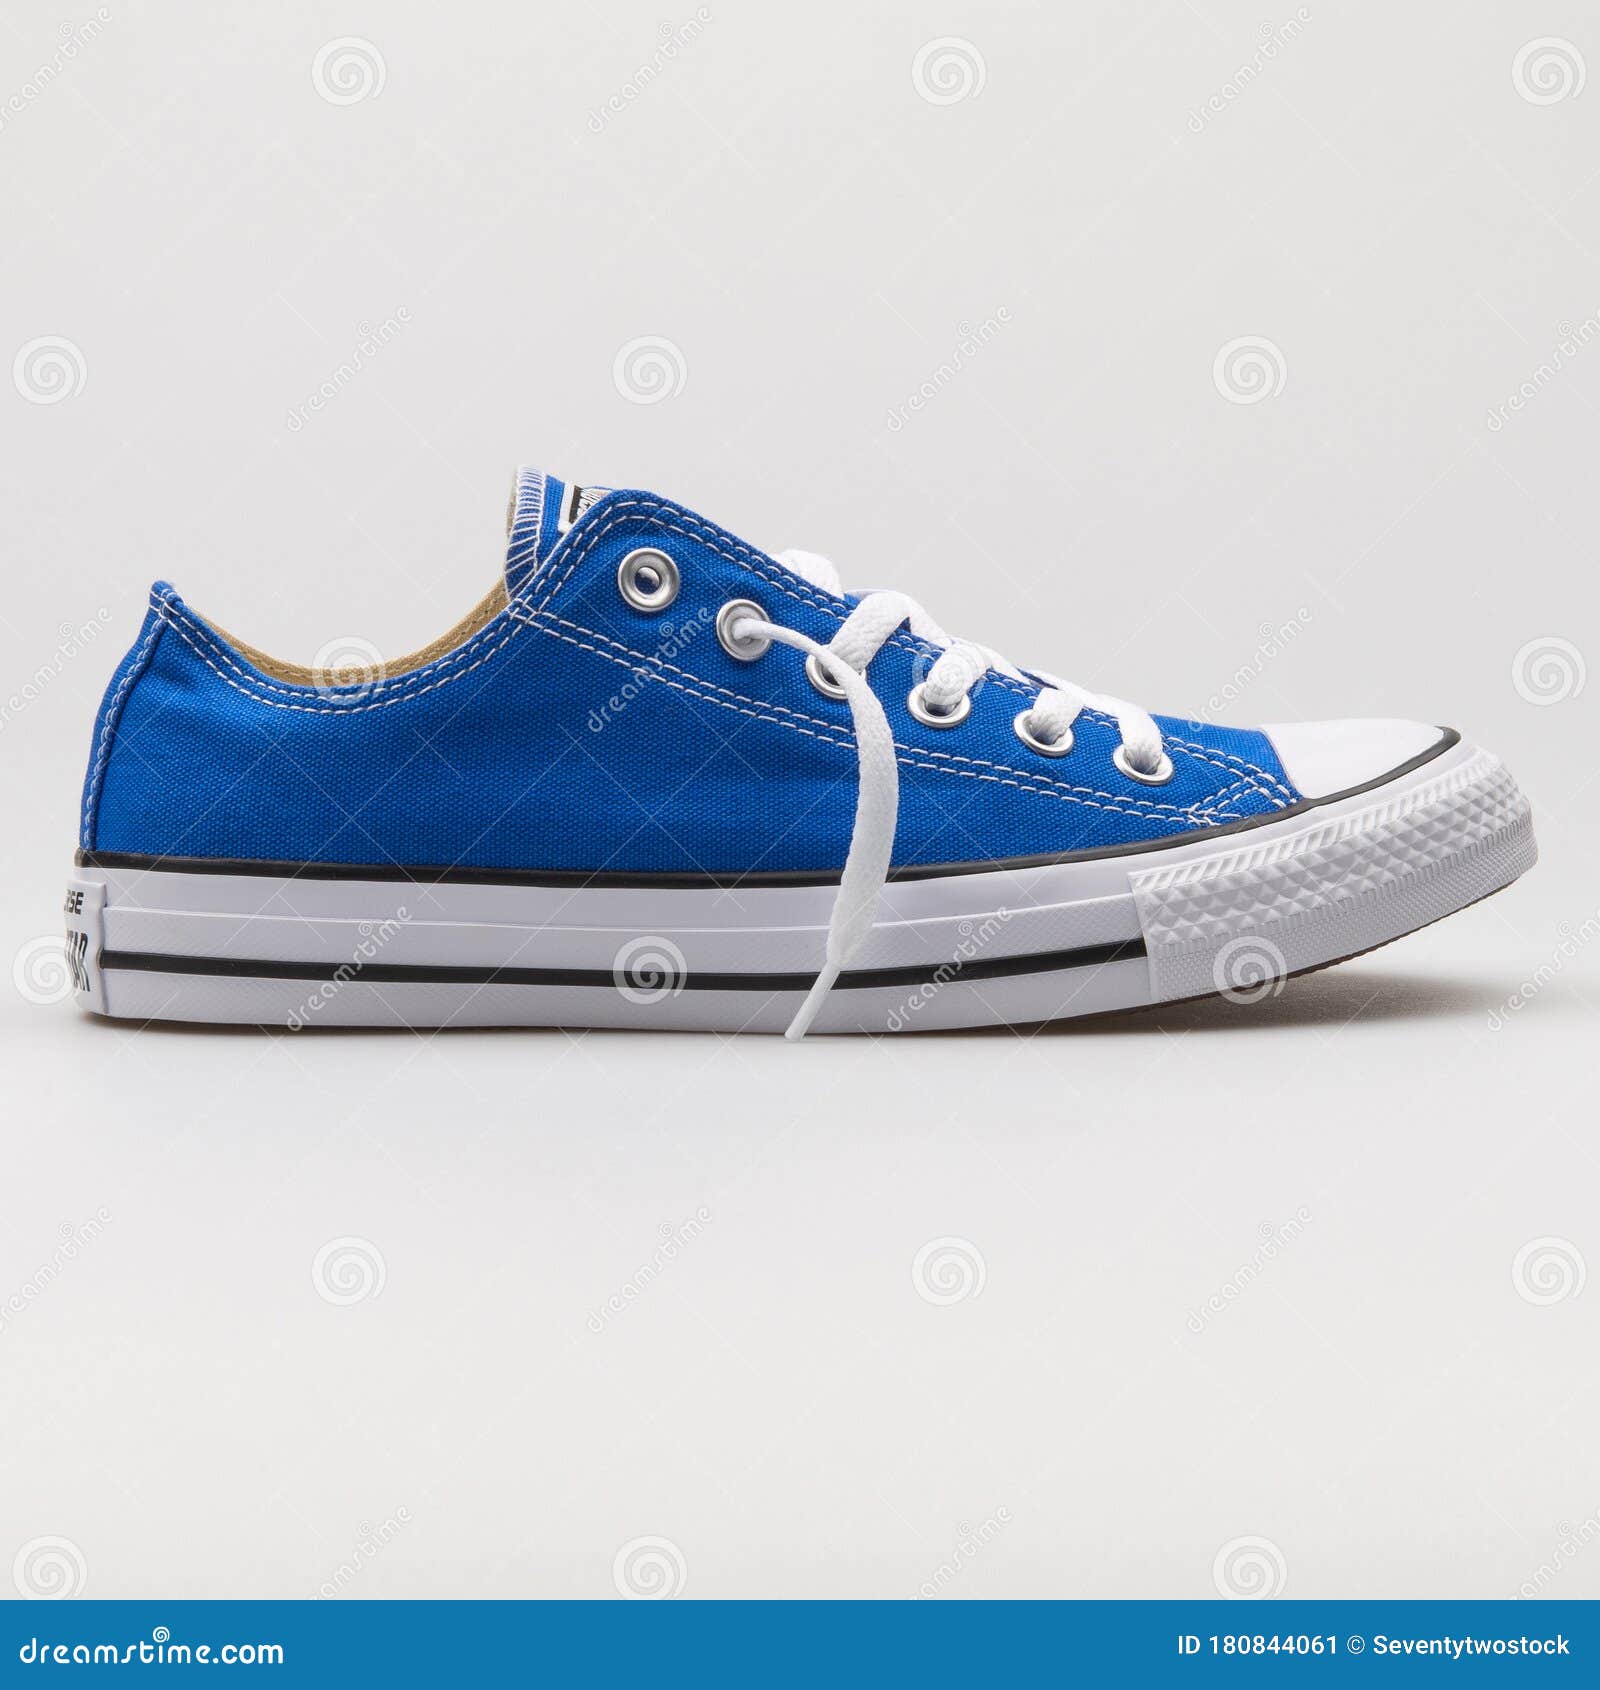 Converse Chuck Taylor All Star OX Royal Blue and White Sneaker ...